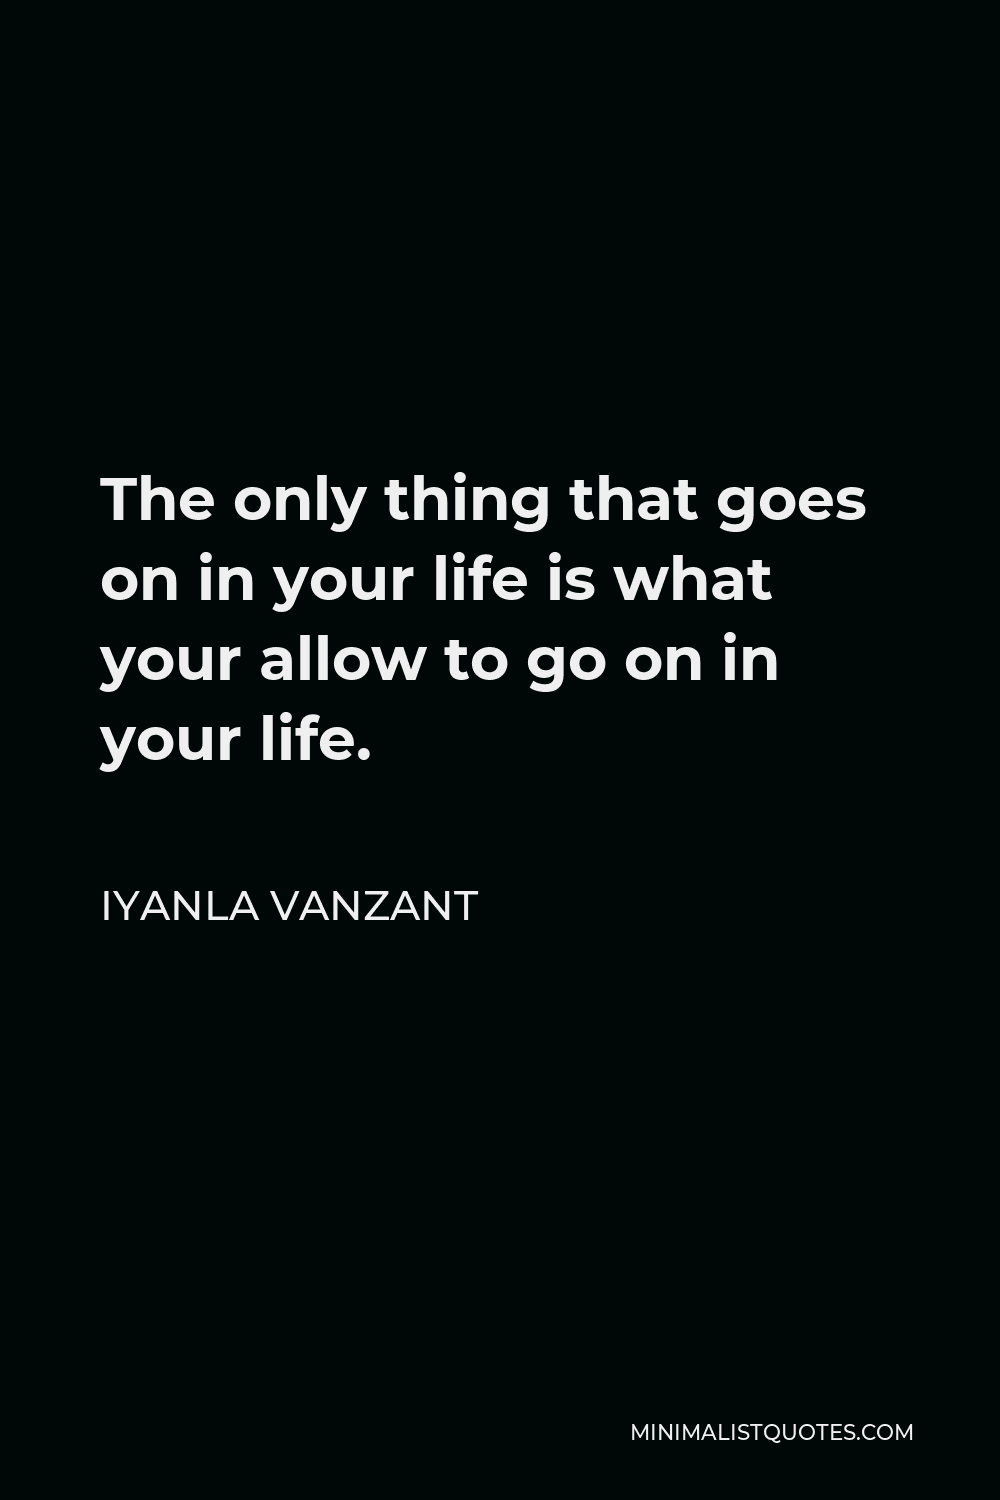 Iyanla Vanzant Quote - The only thing that goes on in your life is what your allow to go on in your life.